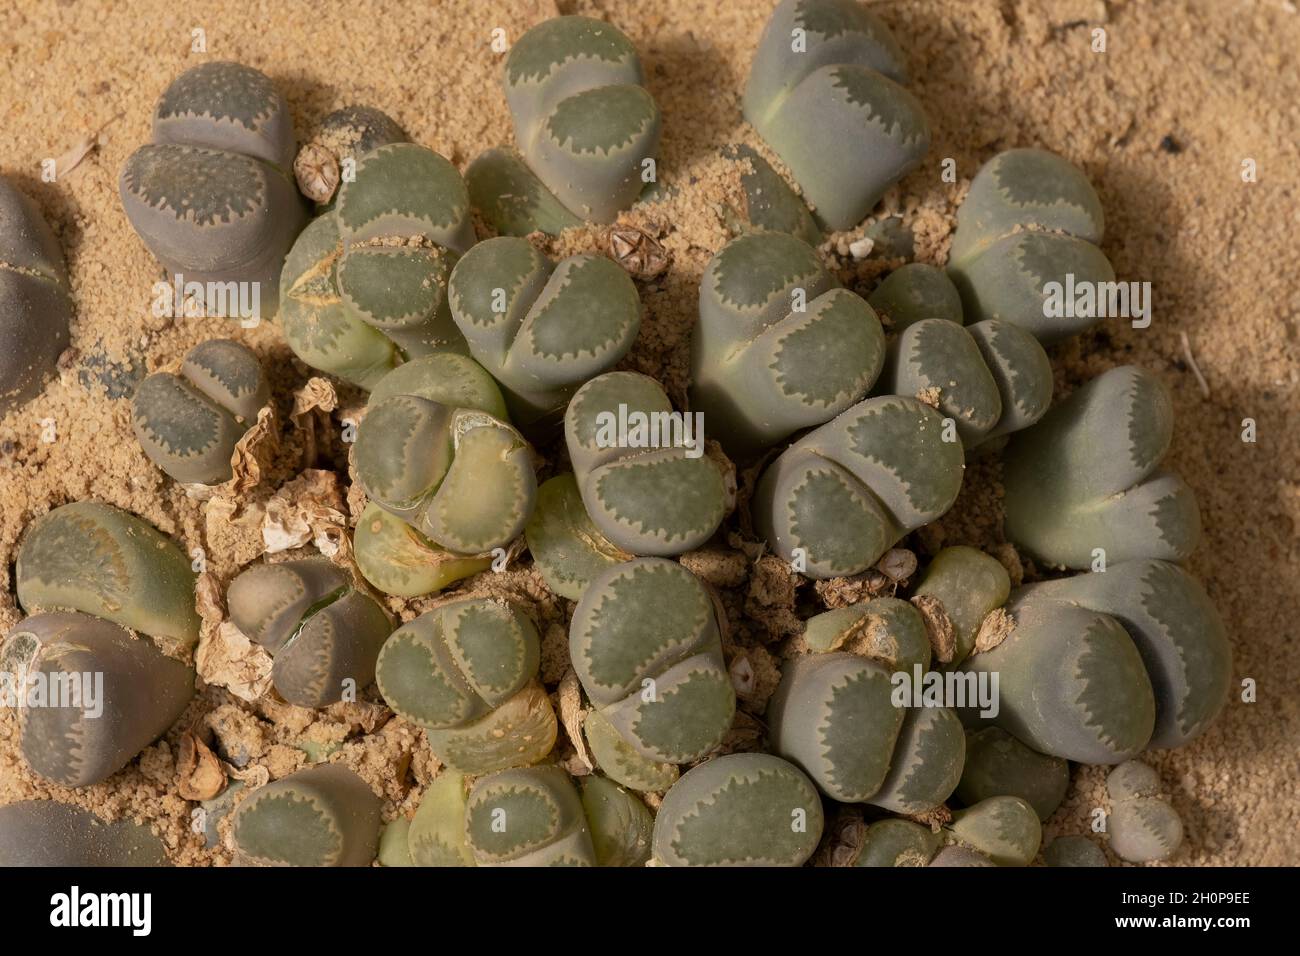 Lithops a genus of succulent plant in the ice plant family, Aizoaceae native to southern Africa. Stock Photo